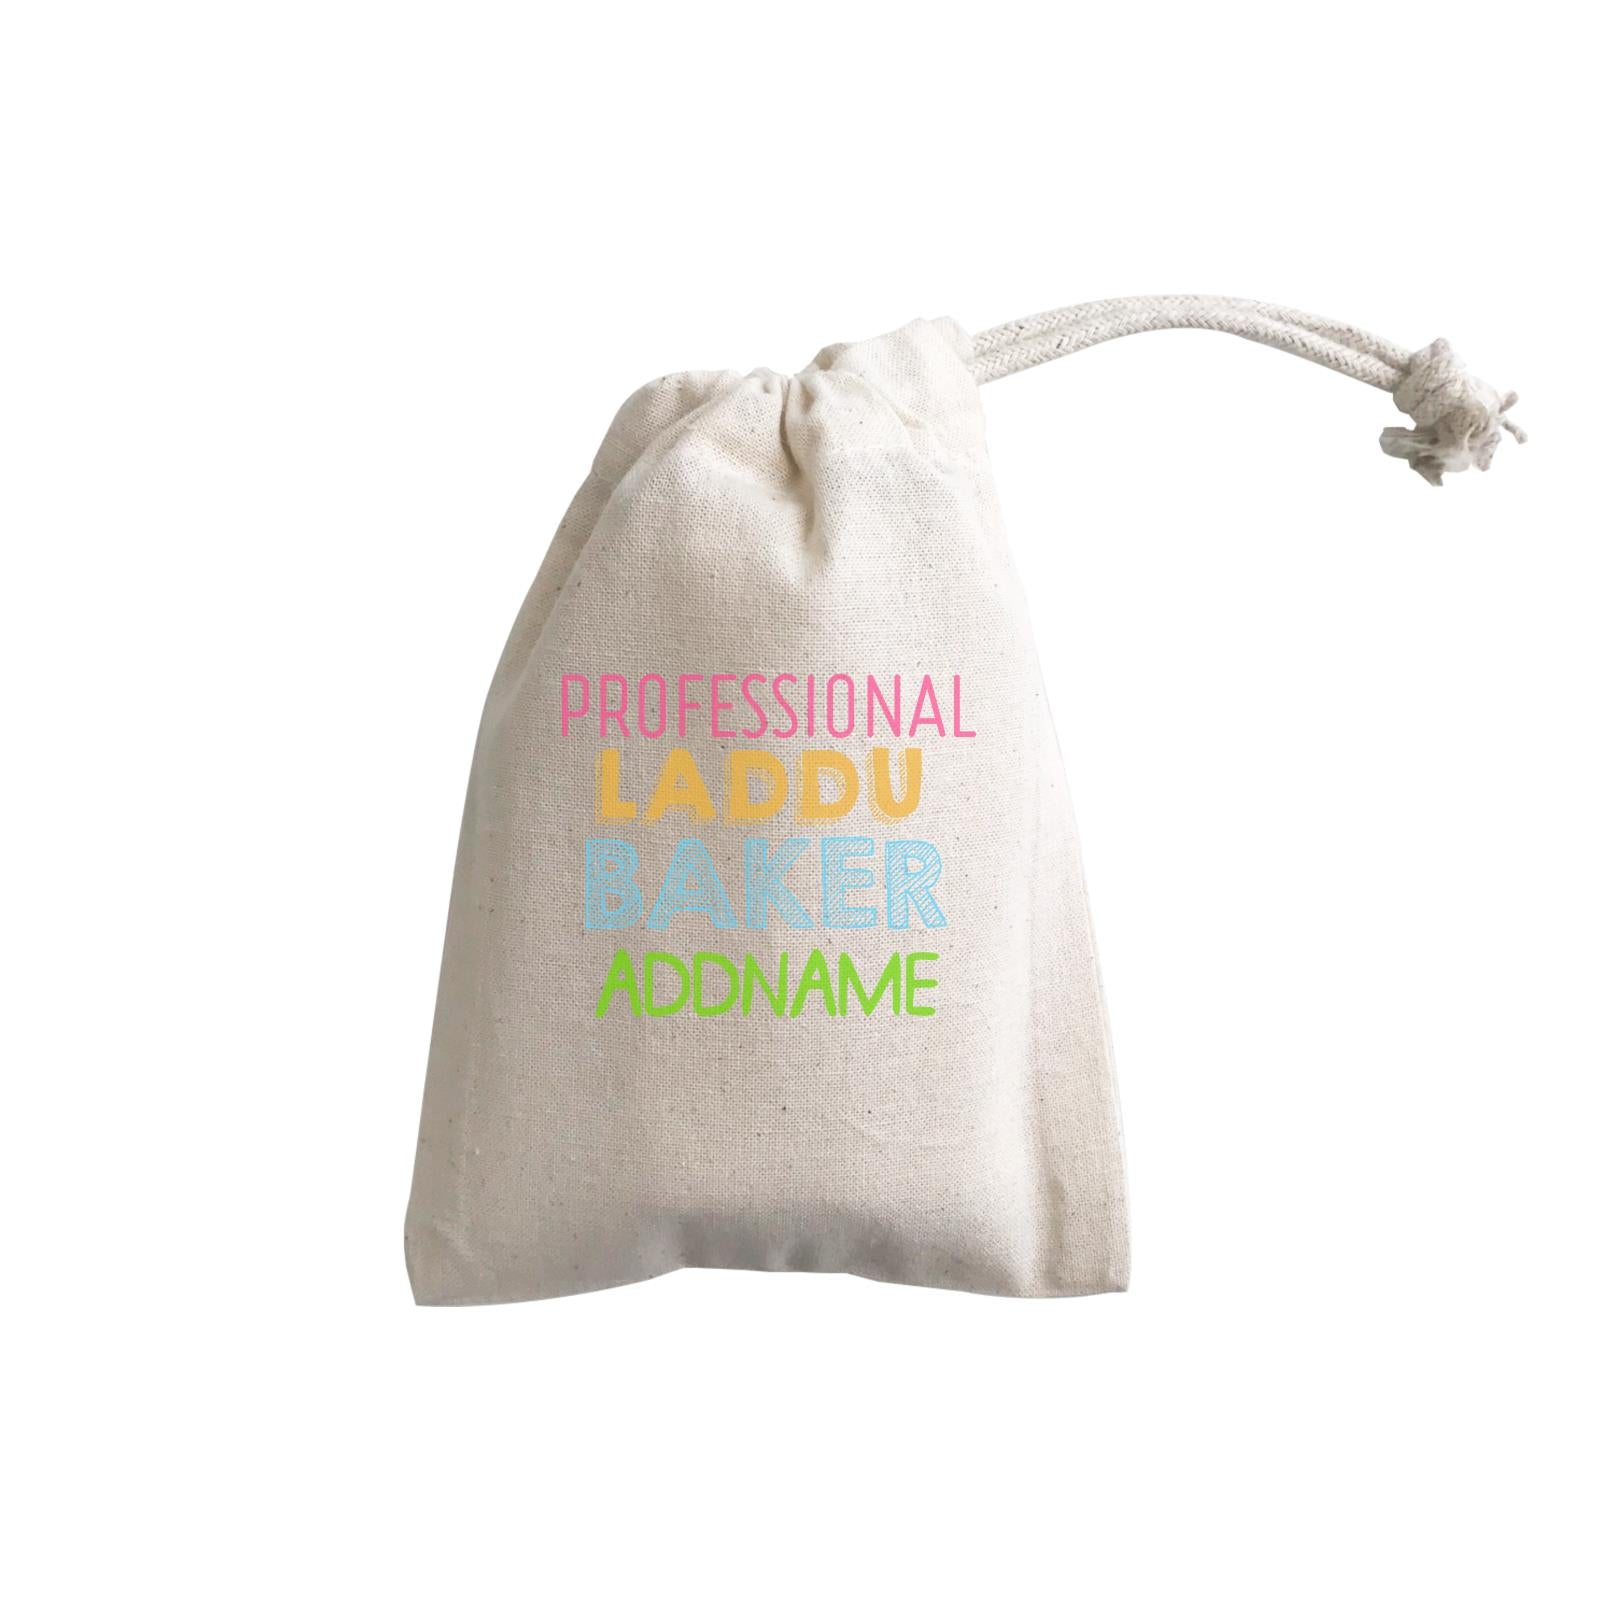 Professional Laddu Baker Addname GP Gift Pouch